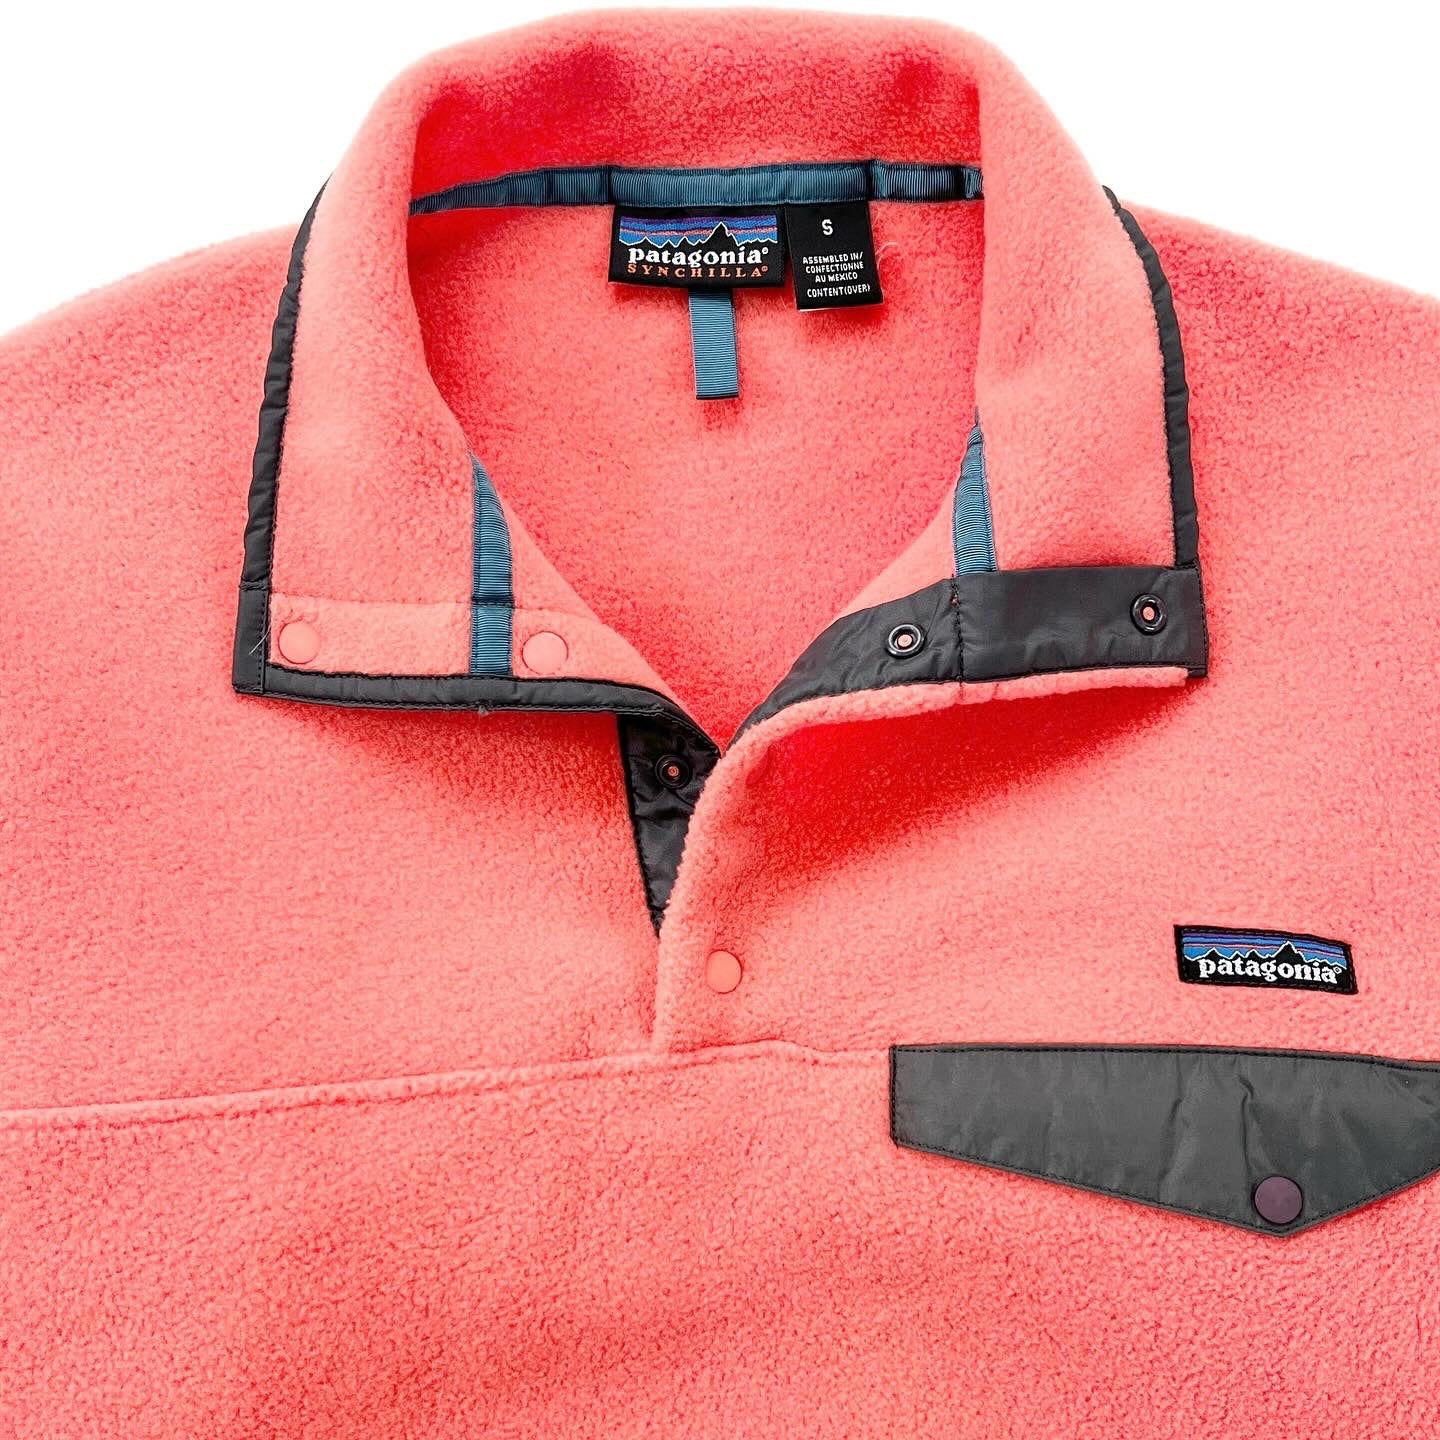 1998 Patagonia Synchilla Snap-T Fleece Pullover, Wild Coral (S)